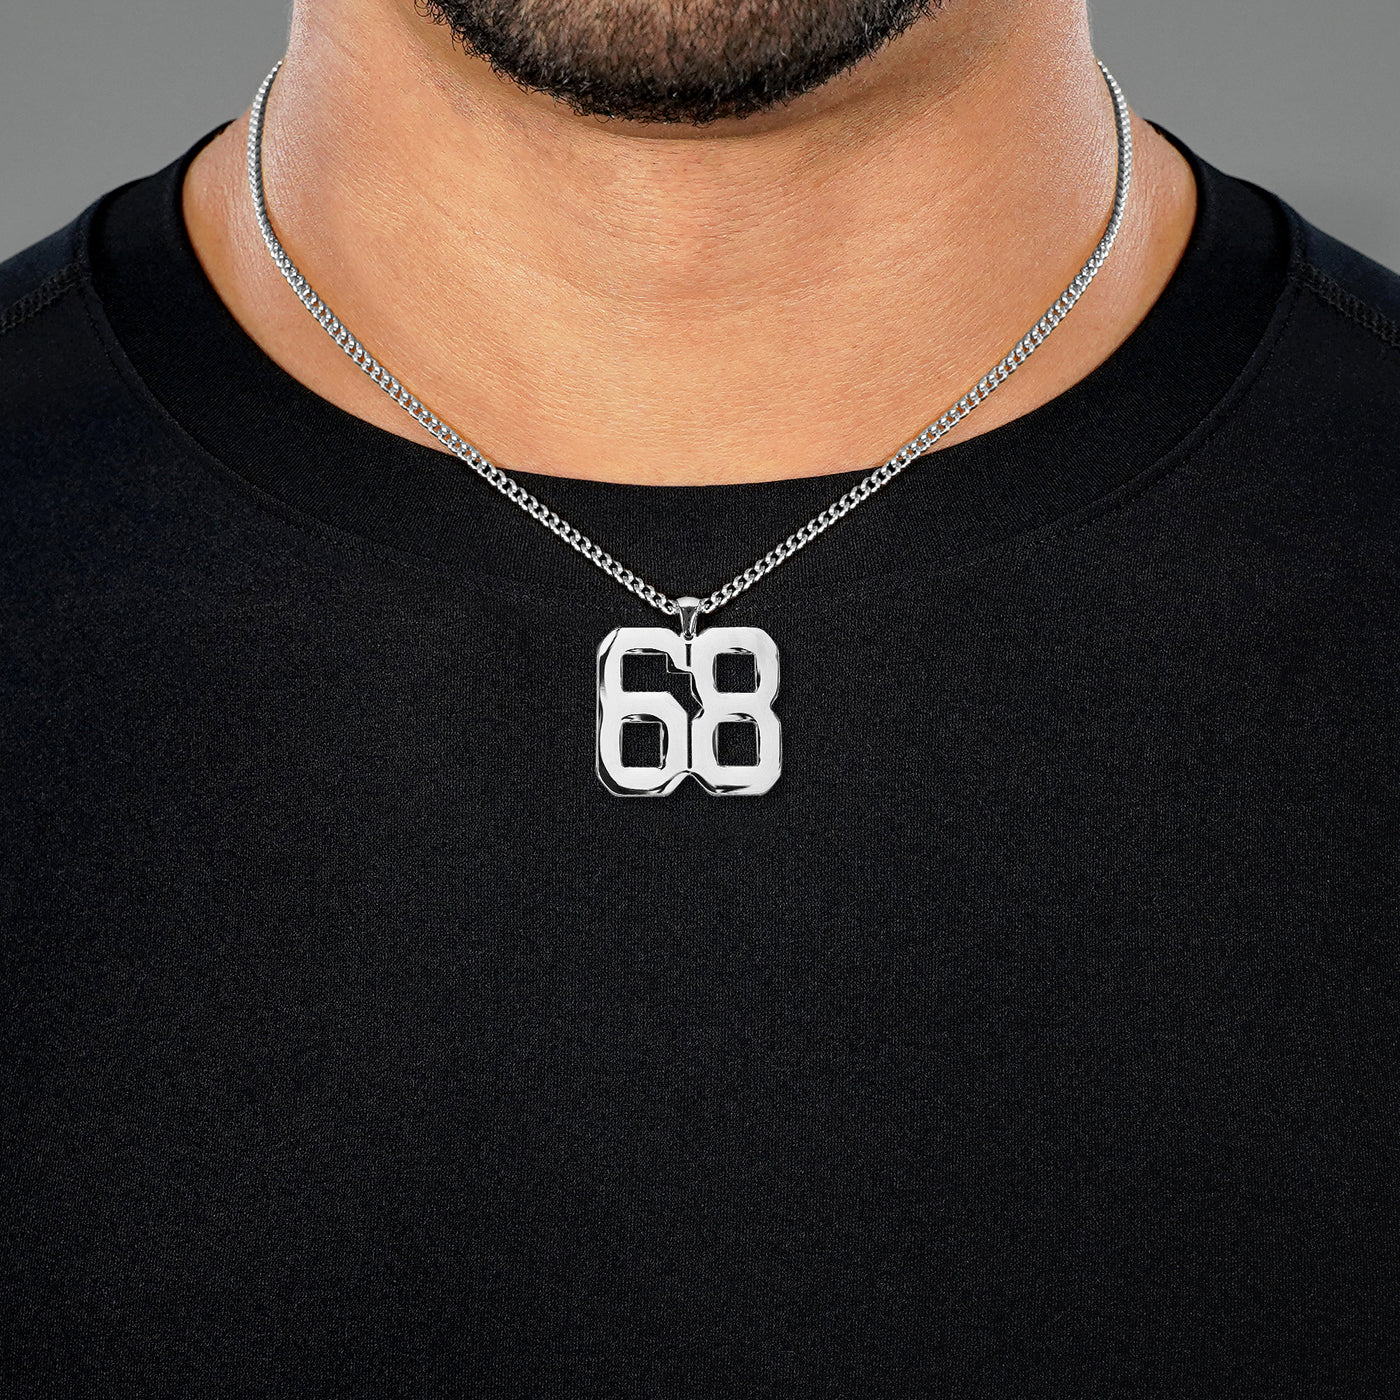 68 Number Pendant with Chain Necklace - Stainless Steel